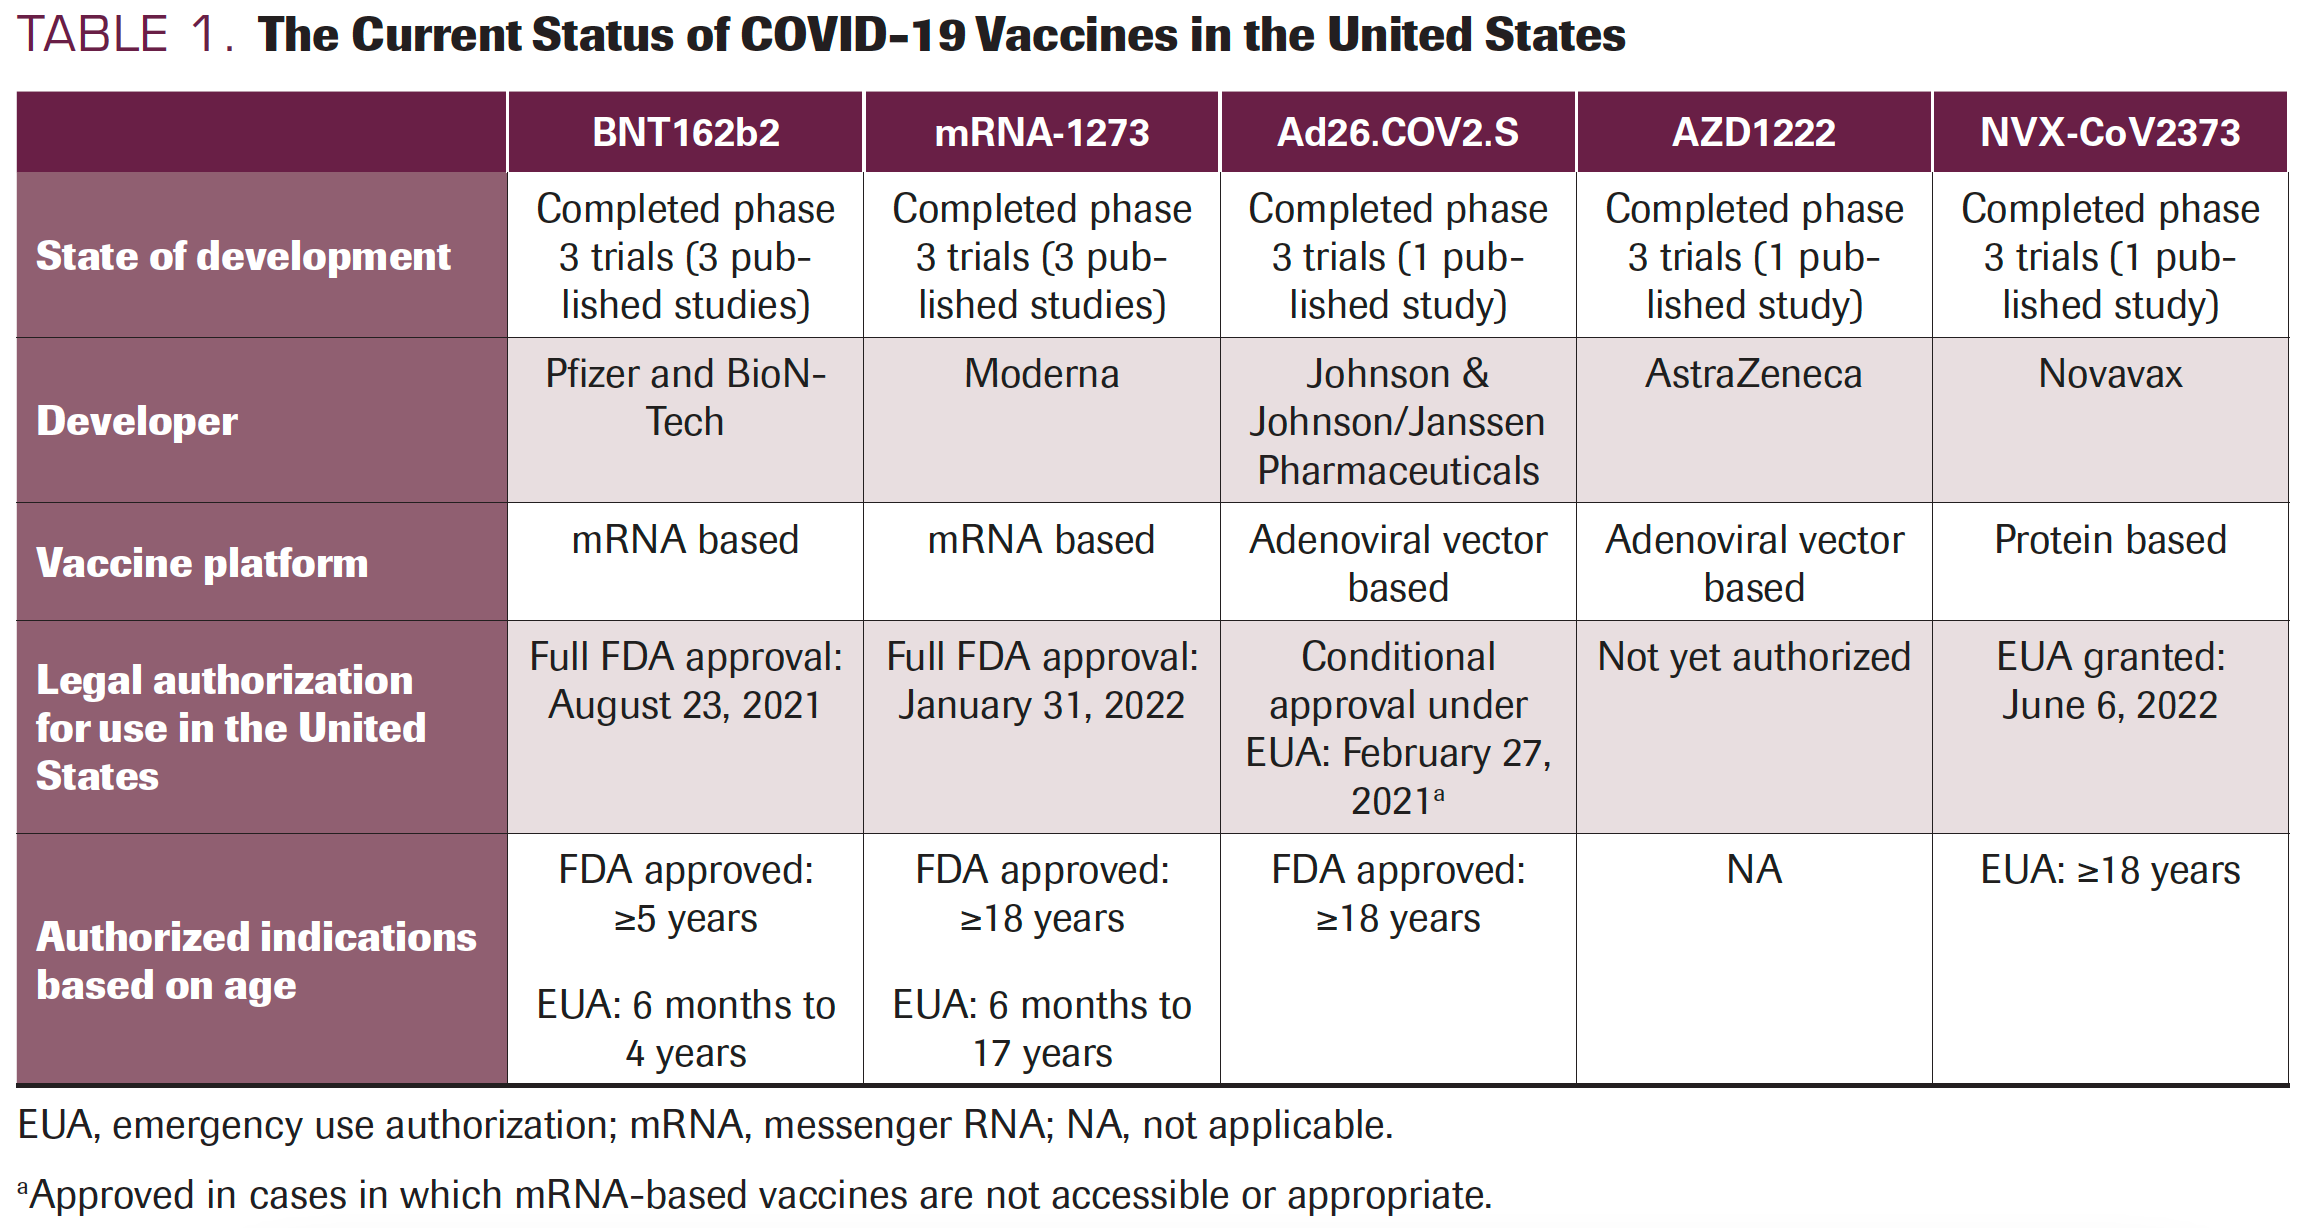 TABLE 1. The Current Status of COVID-19 Vaccines in the United States